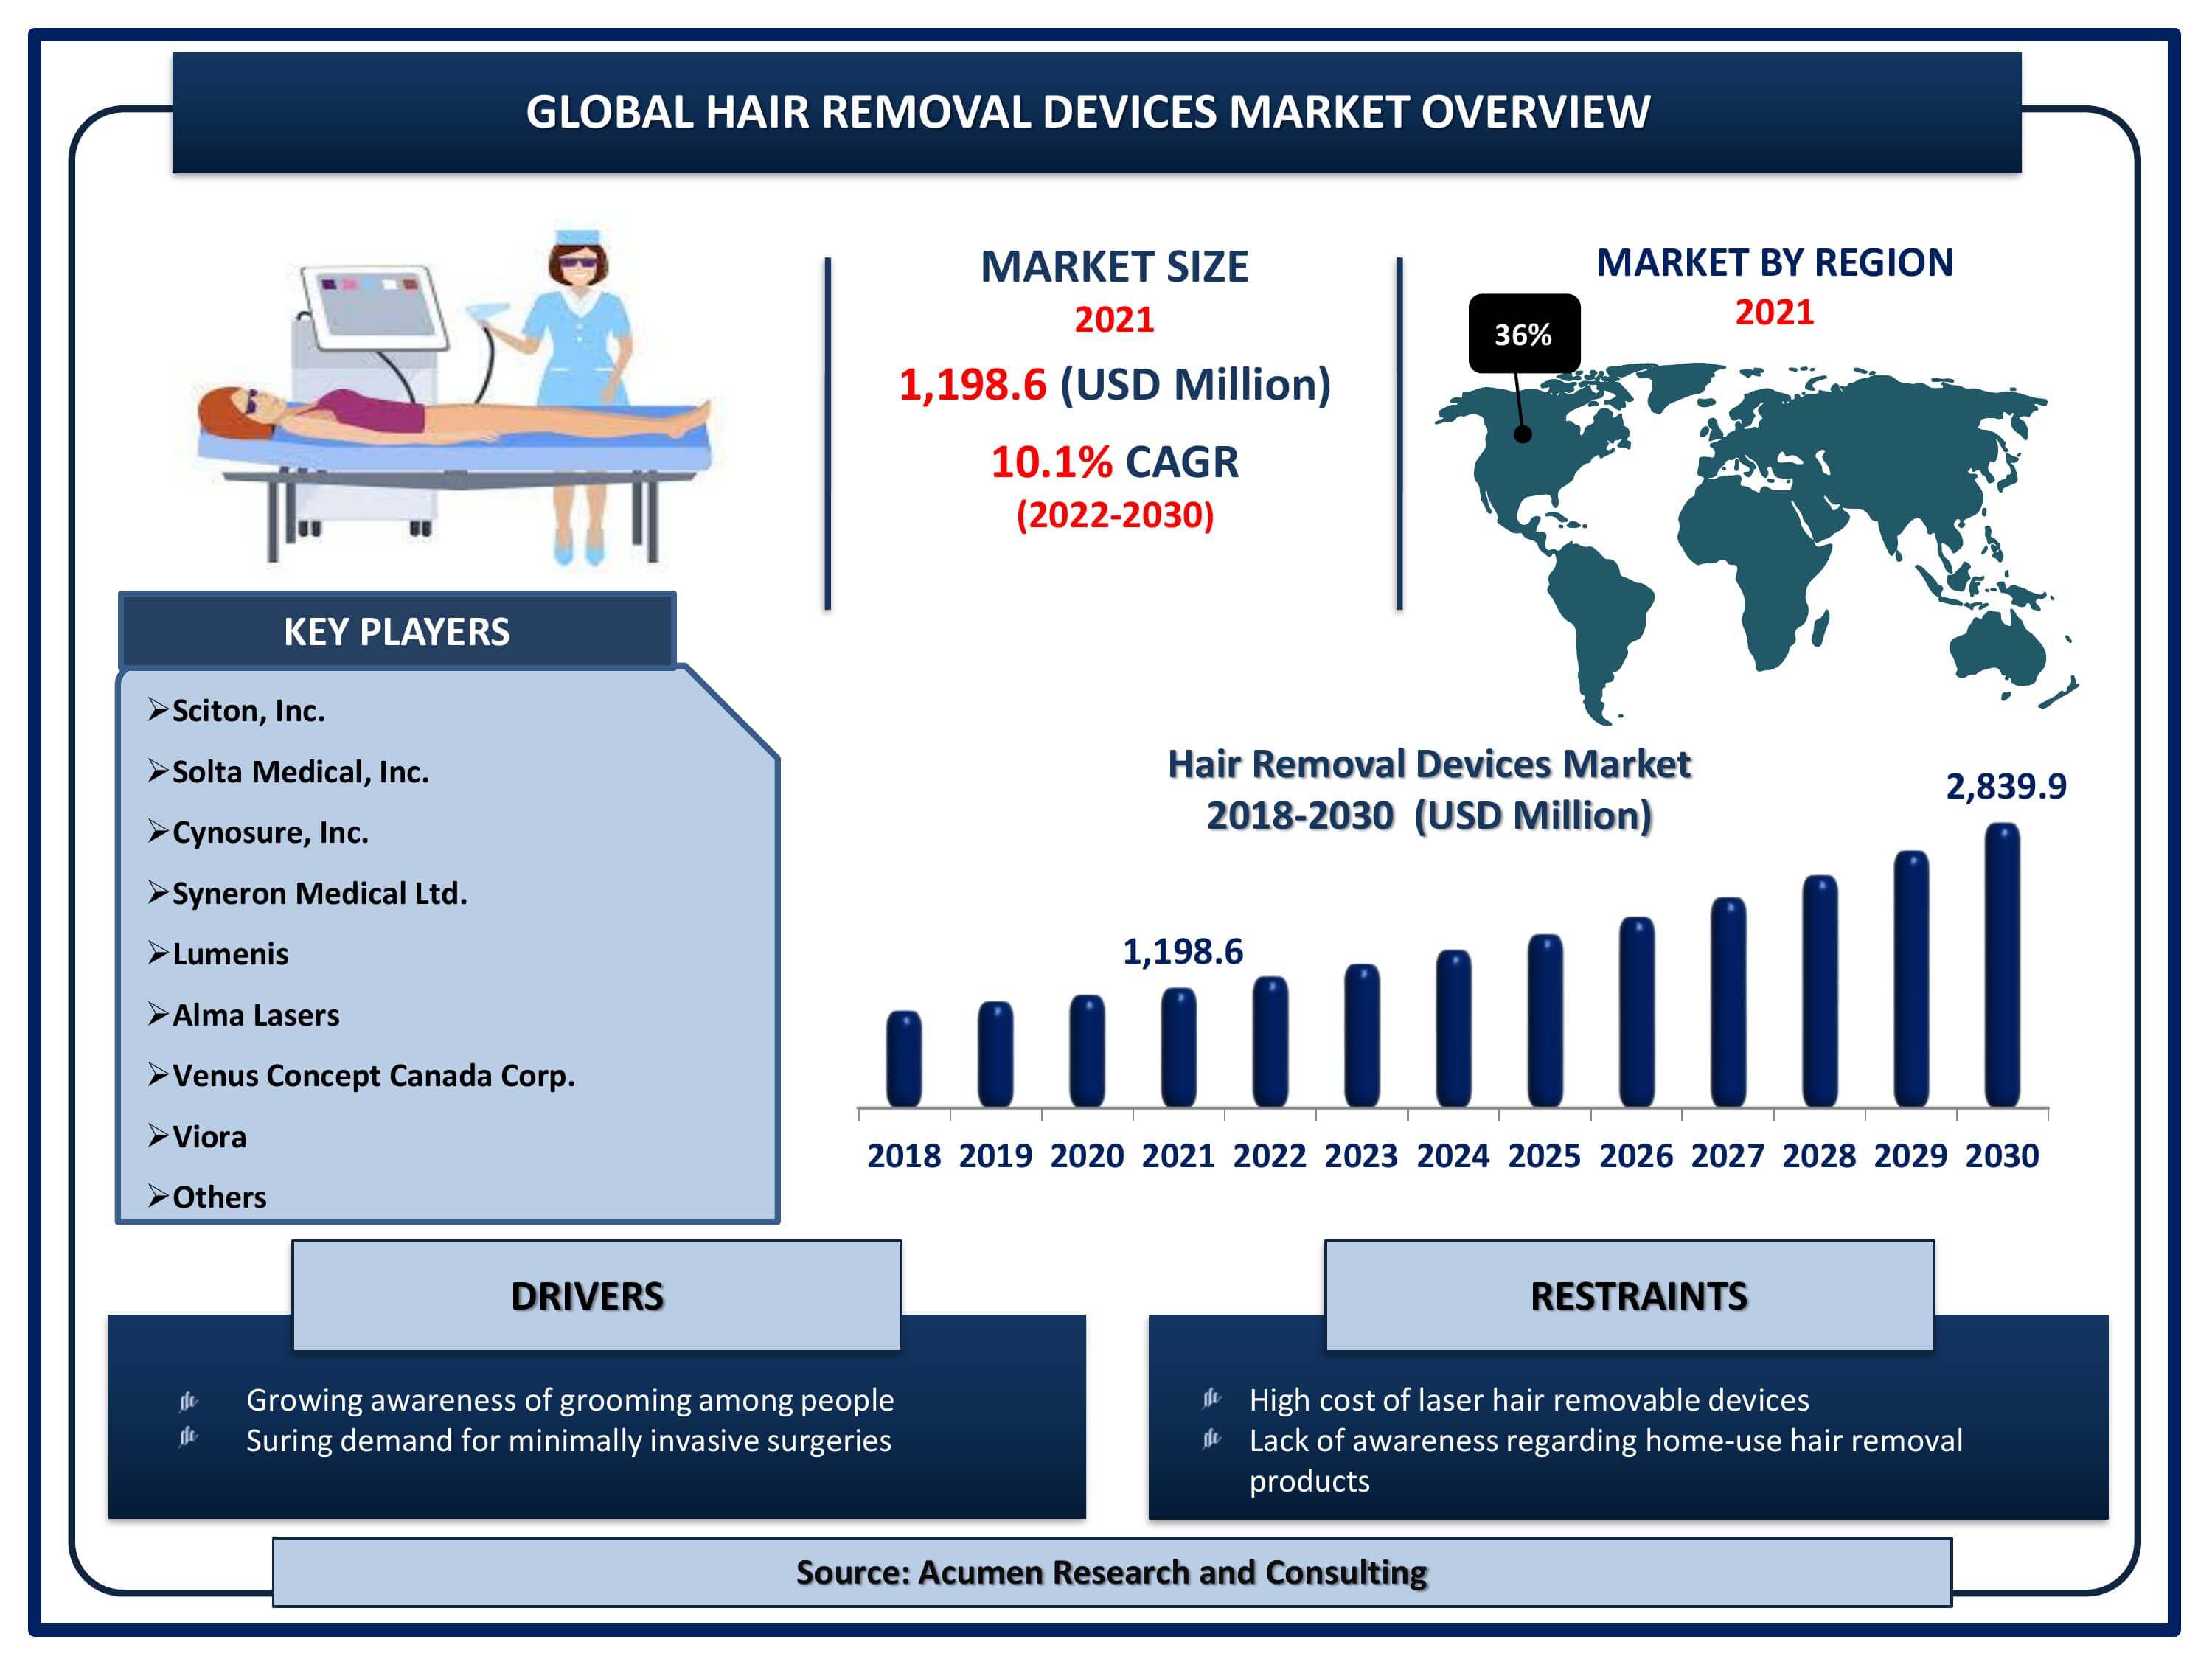 Global hair removal device market revenue is estimated to reach USD 2,839.9 Million by 2030 with a CAGR of 10.1% from 2022 to 2030